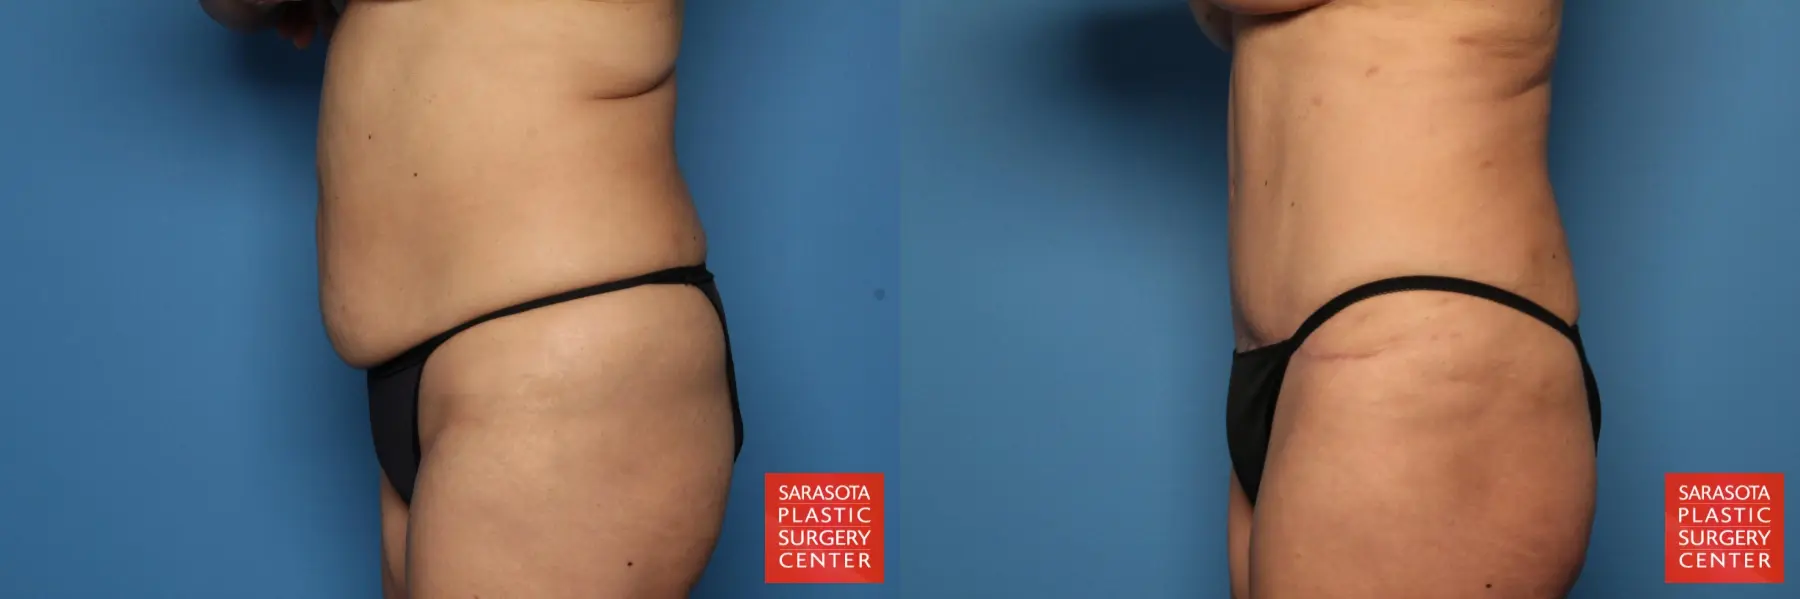 Tummy Tuck: Patient 4 - Before and After 3